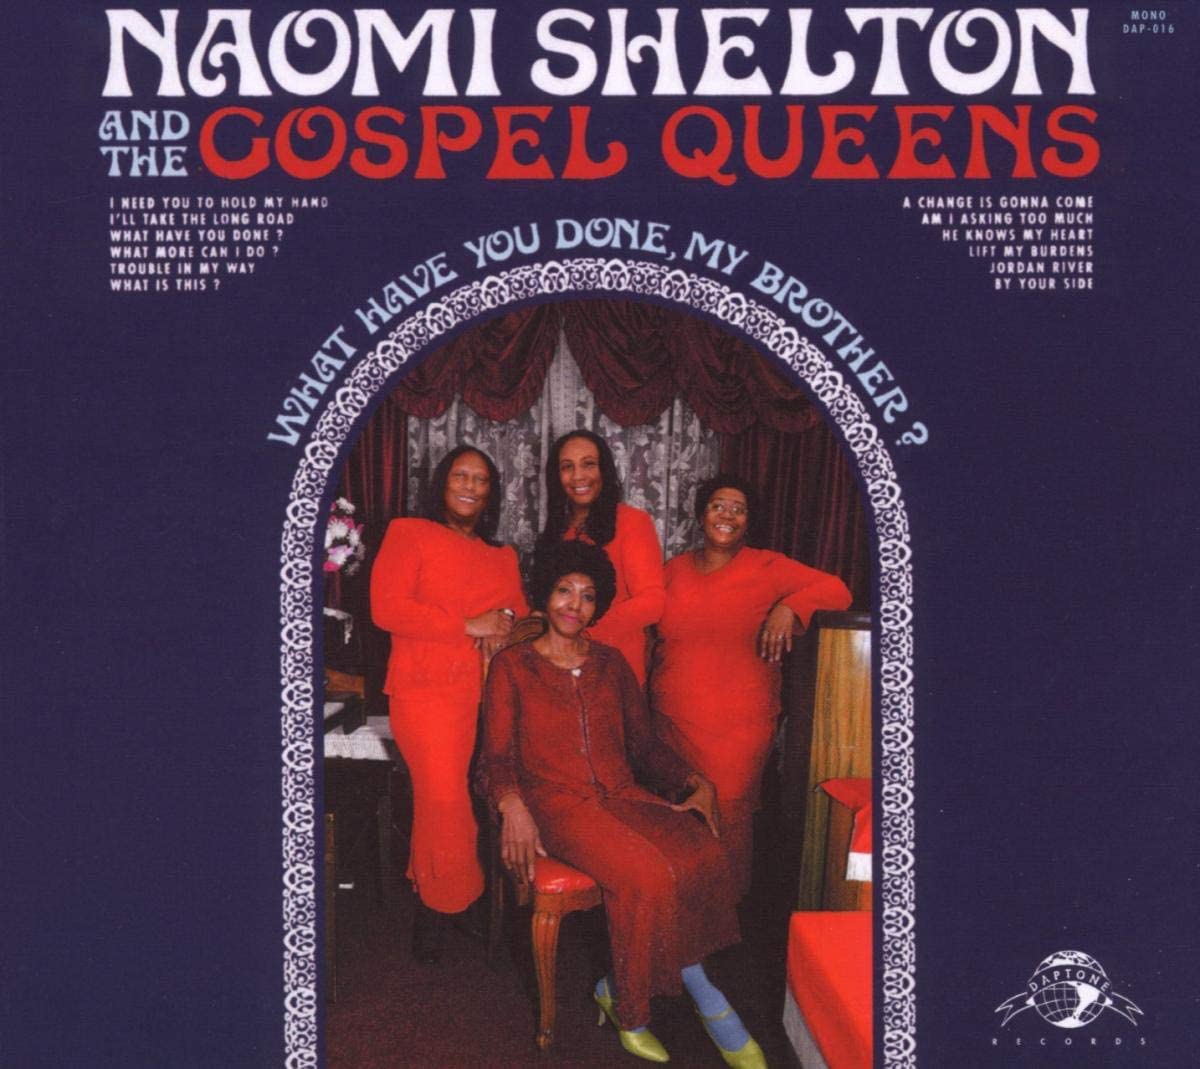 Naomi Shelton & The Gospel Queens - What Have You Done My Brother? - CD